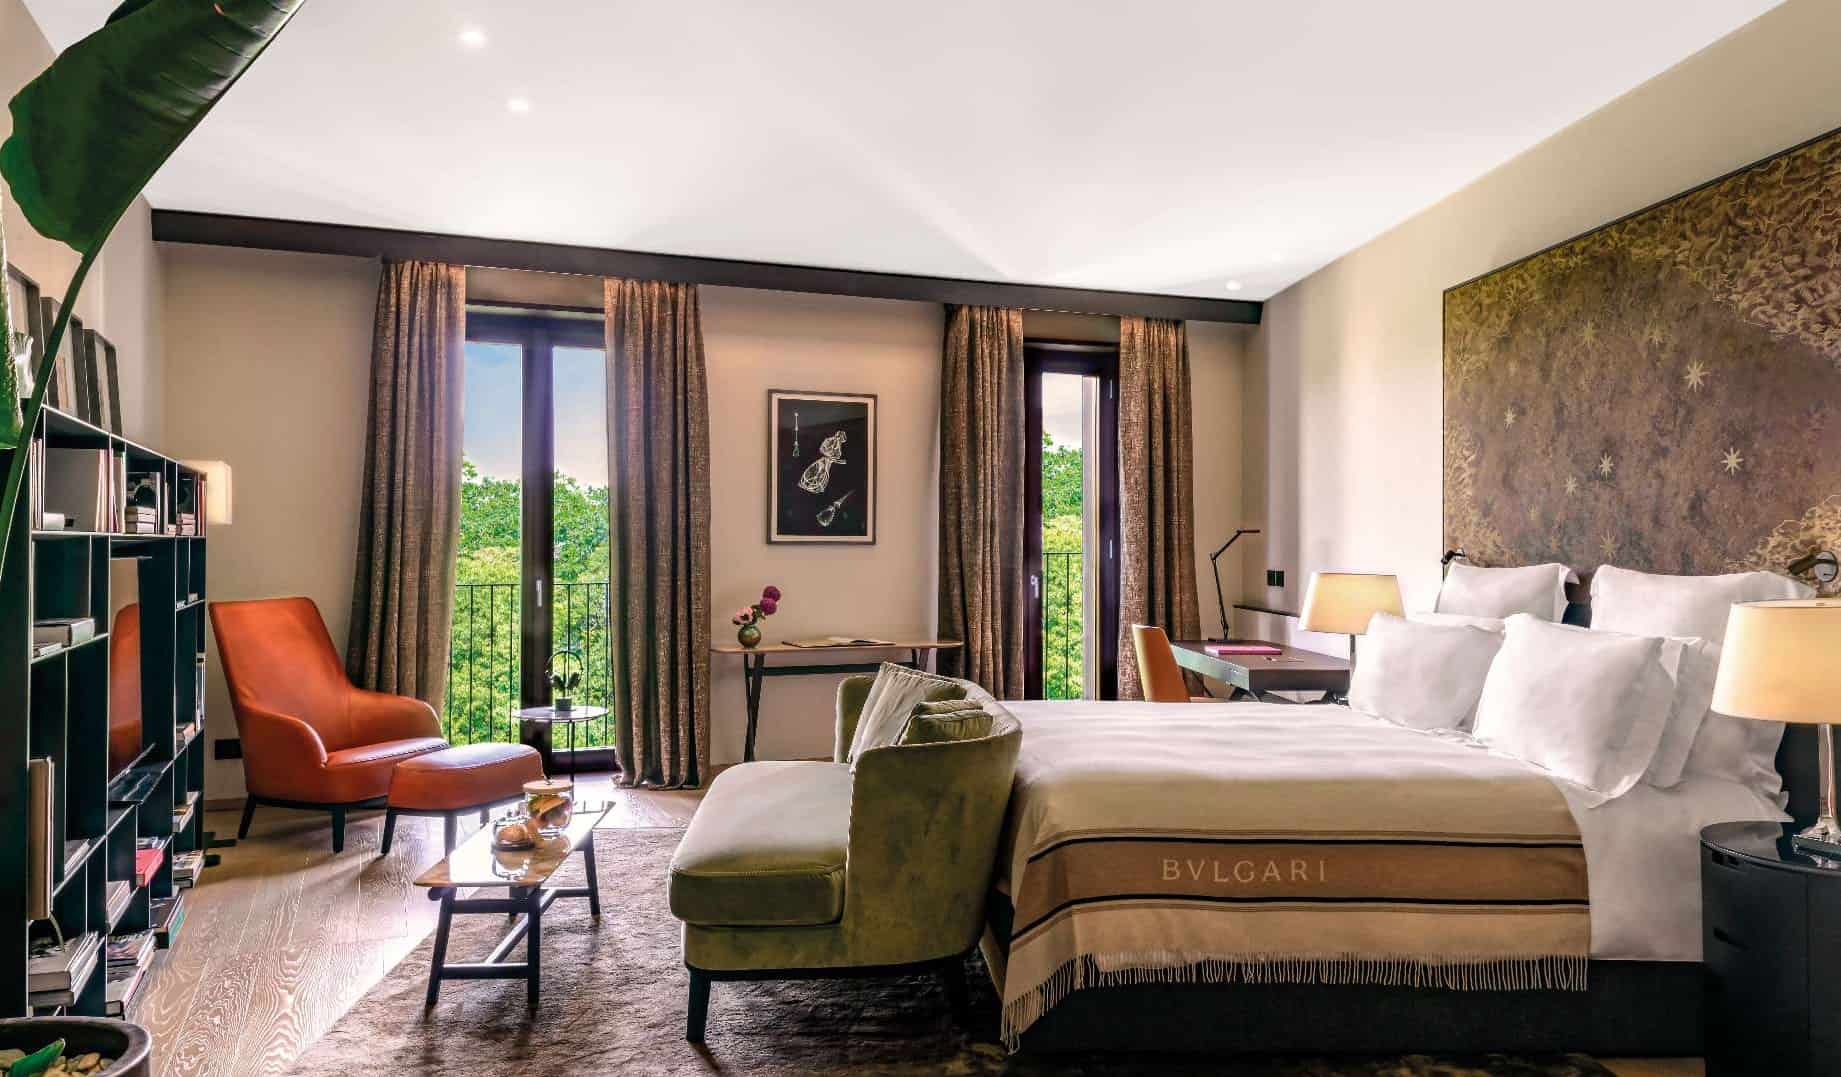 A luxurious hotel room with a velvet sofa, leather armchair, bookcases and a king-size bed covered in blankets at Bulgari Hotel Milano, a five-star hotel in Milan, Italy